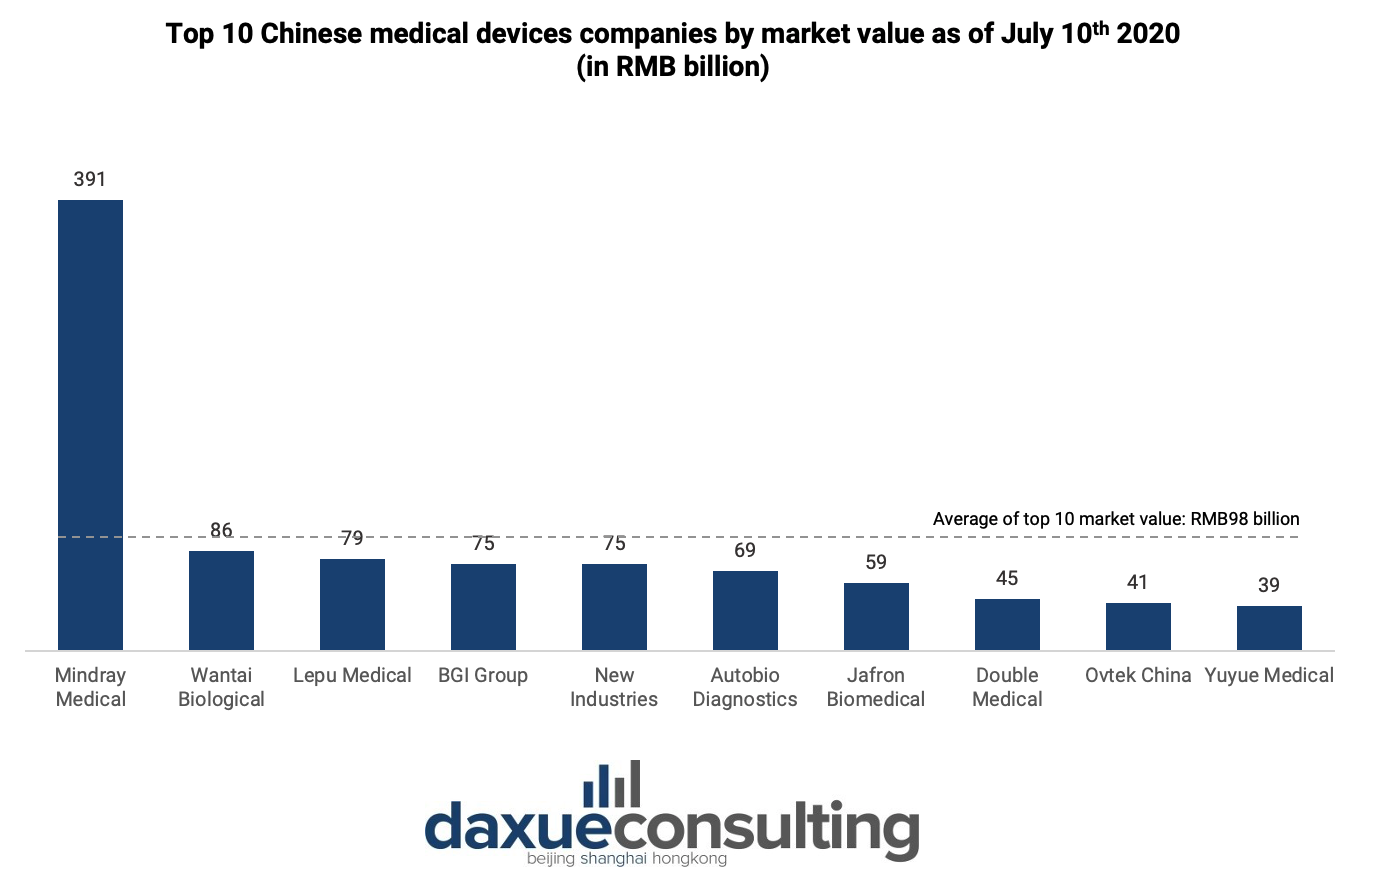 Top 10 China's Medtech industry players